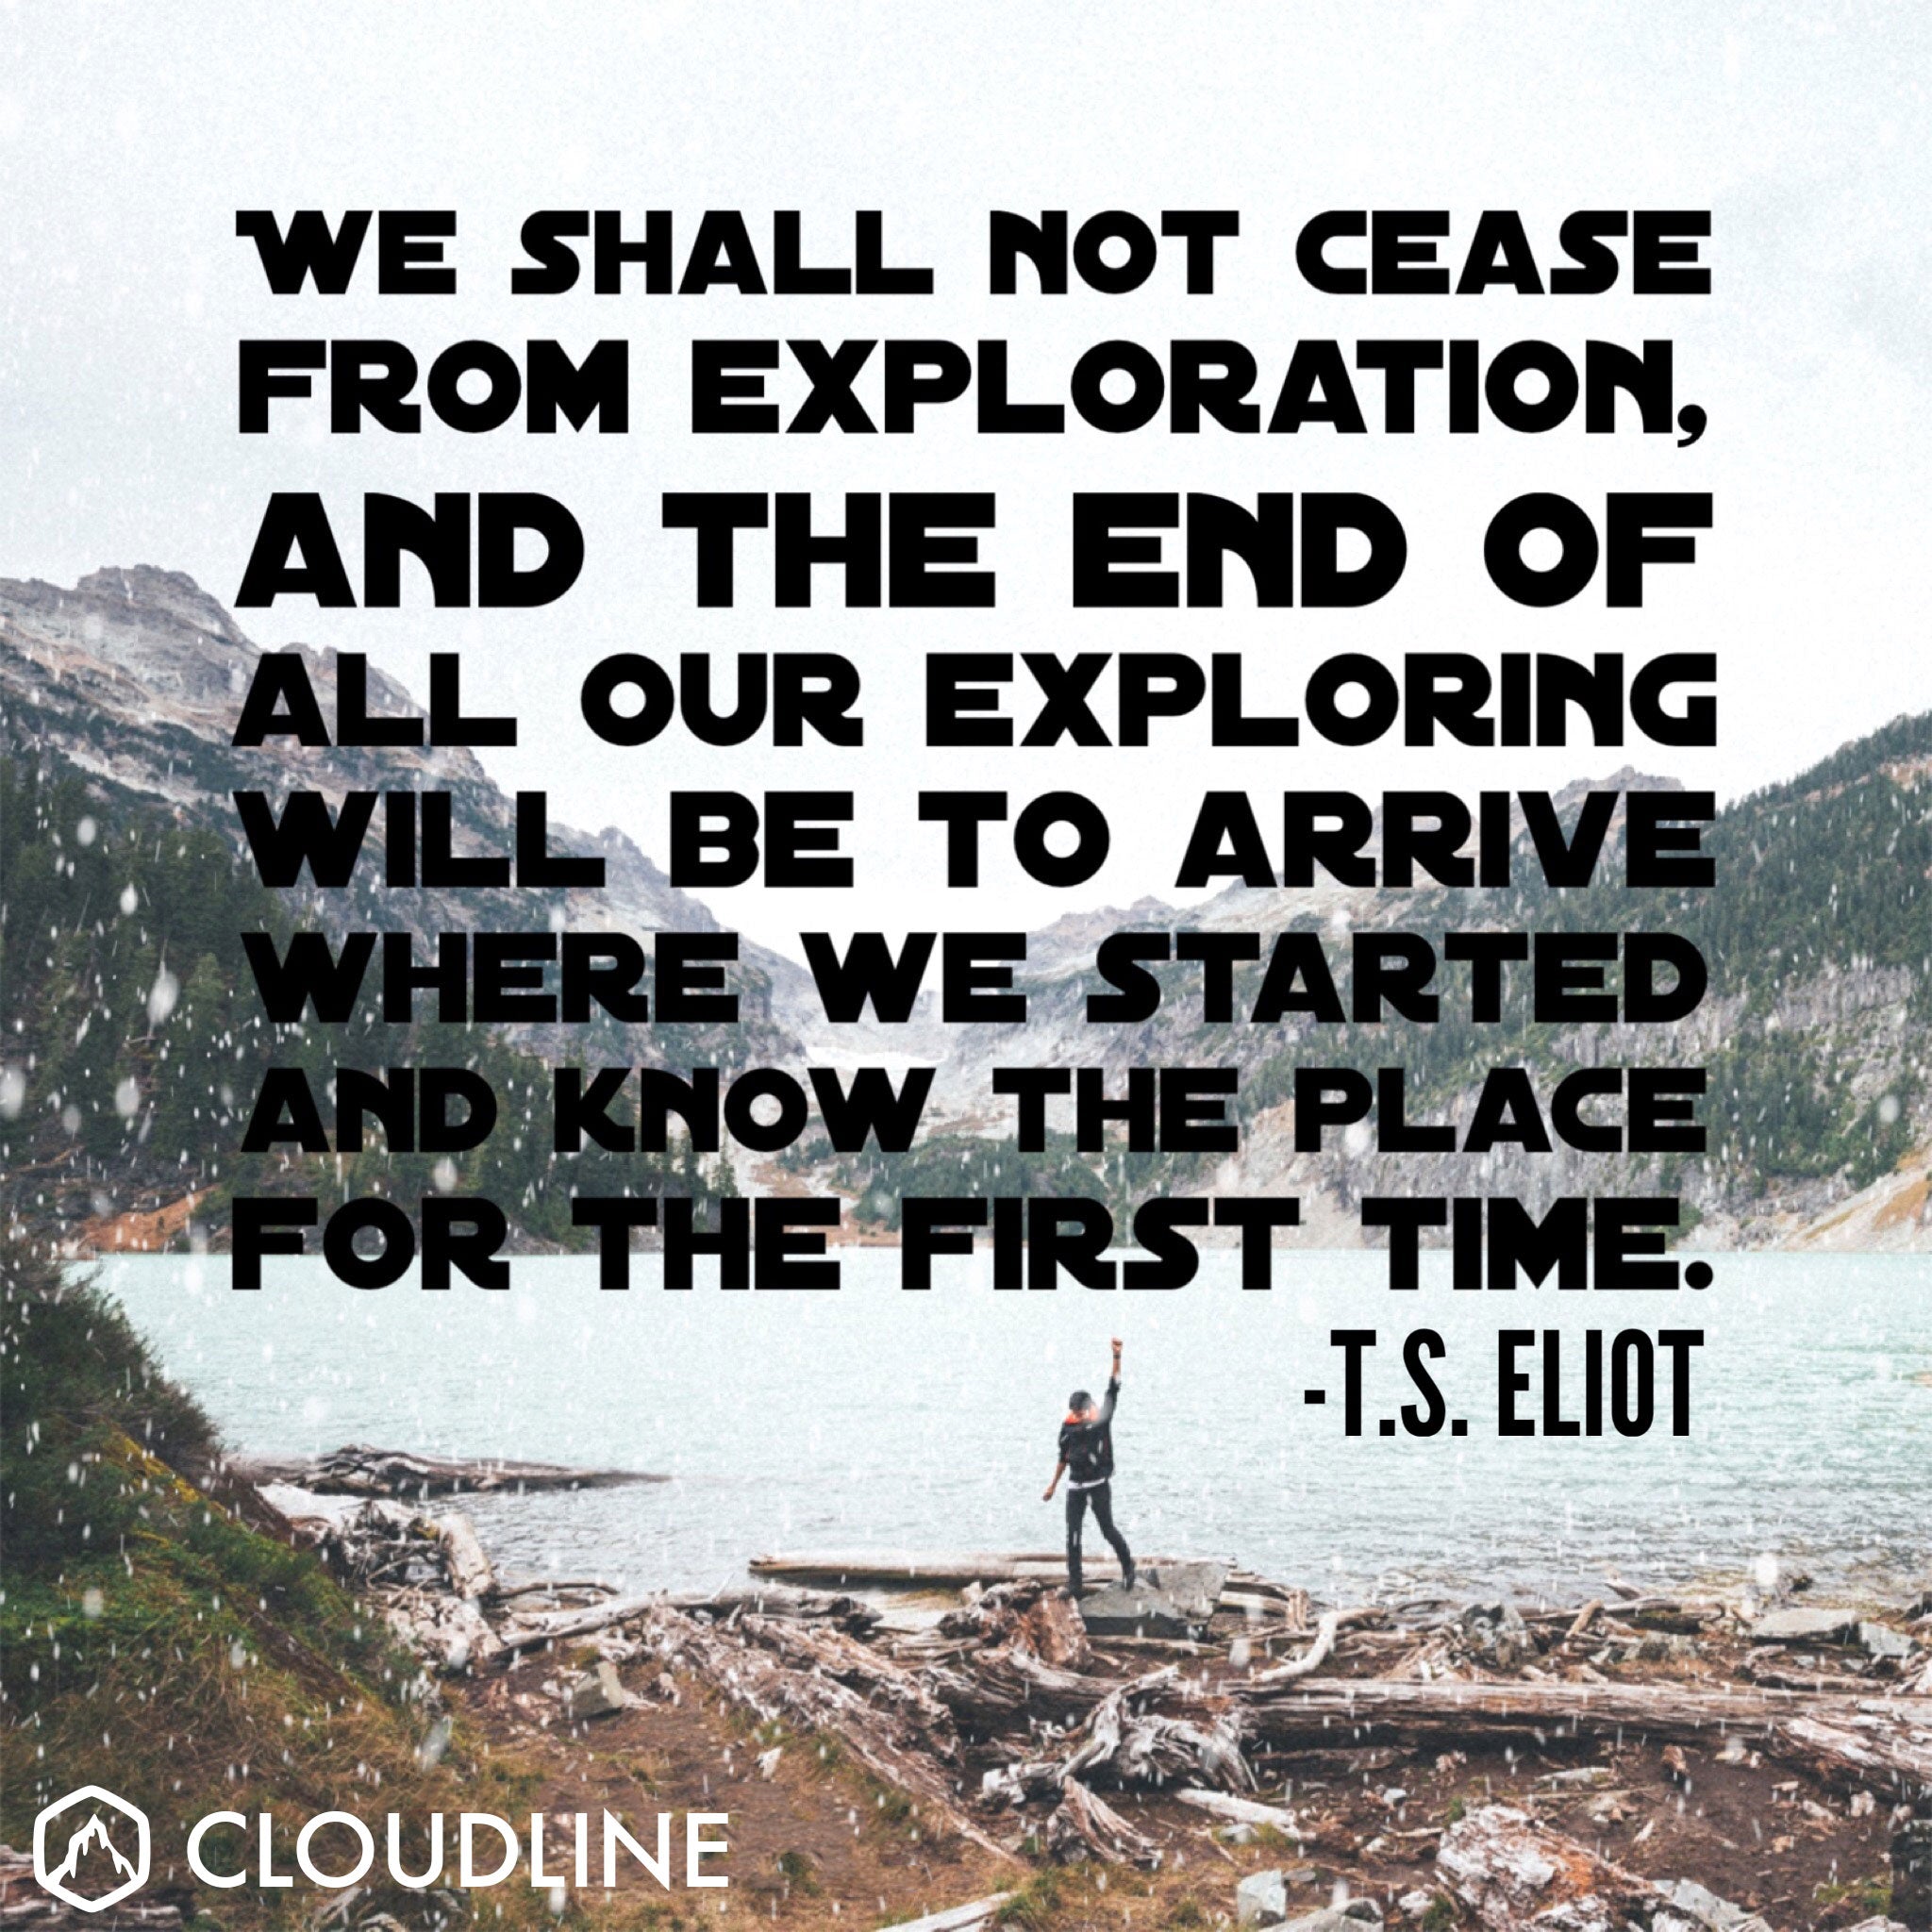 "We shall not cease from exploration, and then end of all our exploring will be to arrive where we started and know the place for the first time." - T.S Eliot